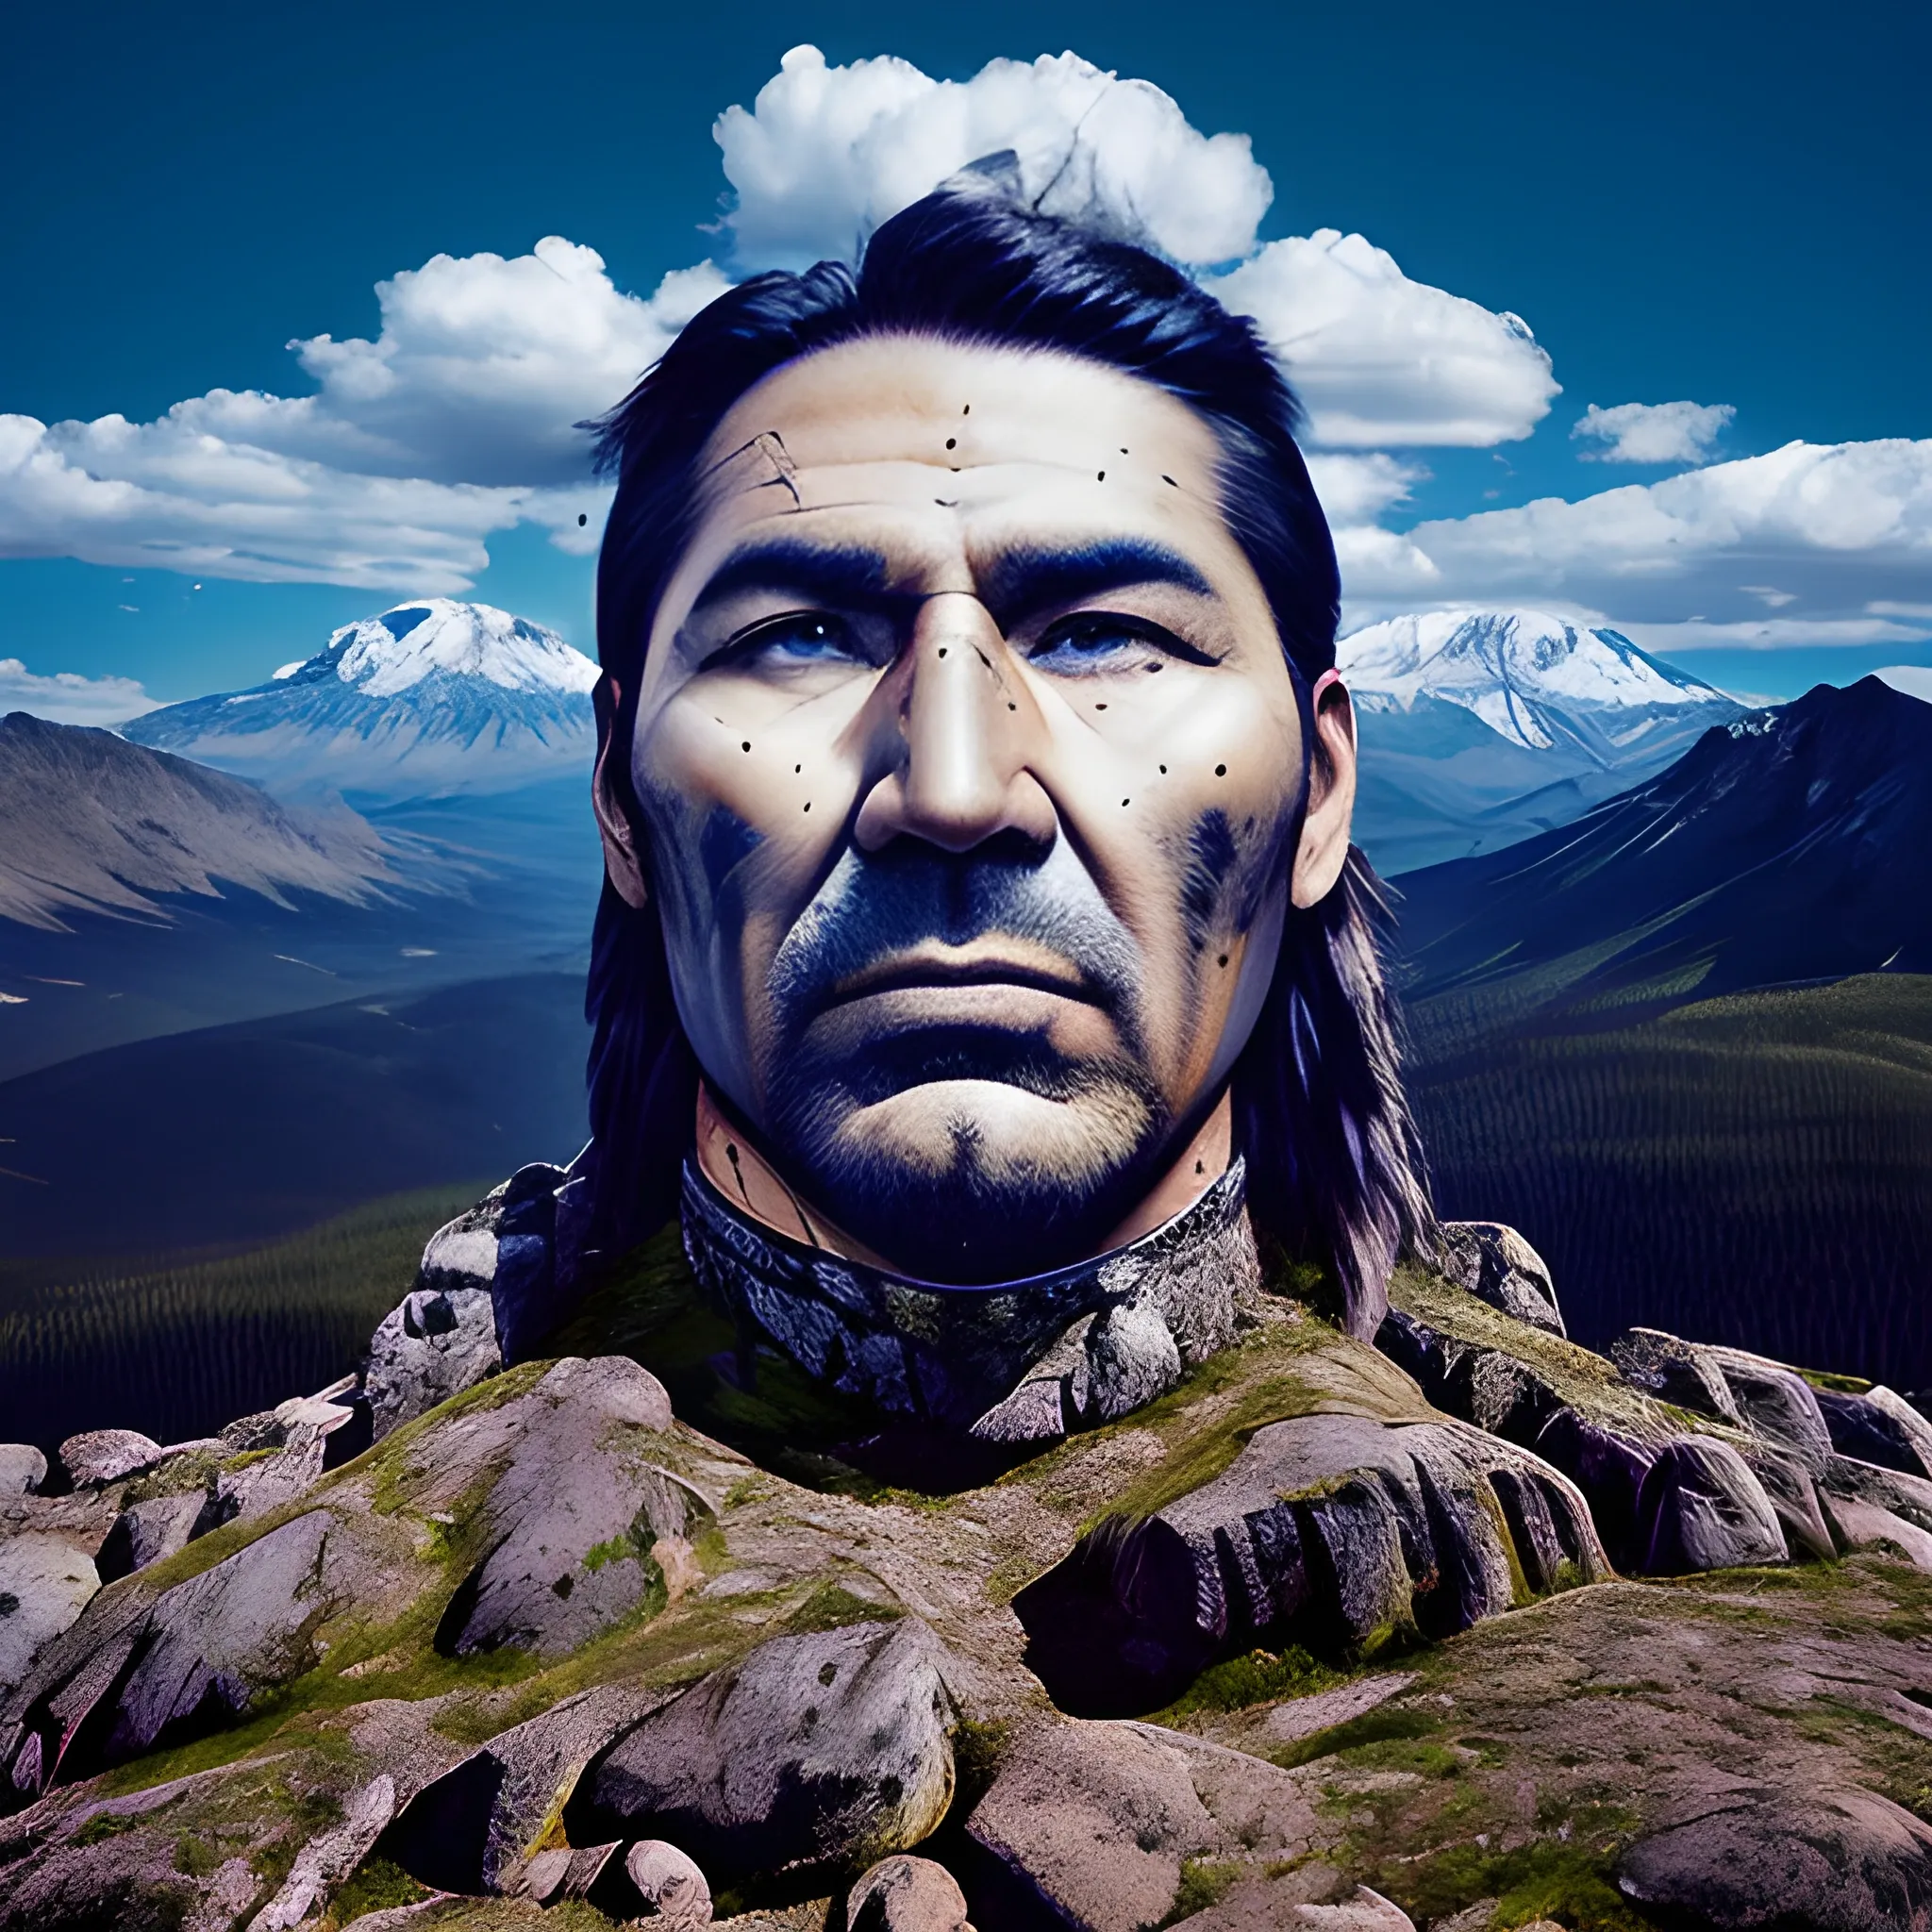 face of chief-
man. mountin landscape,
athmospher, clouds, Trippy